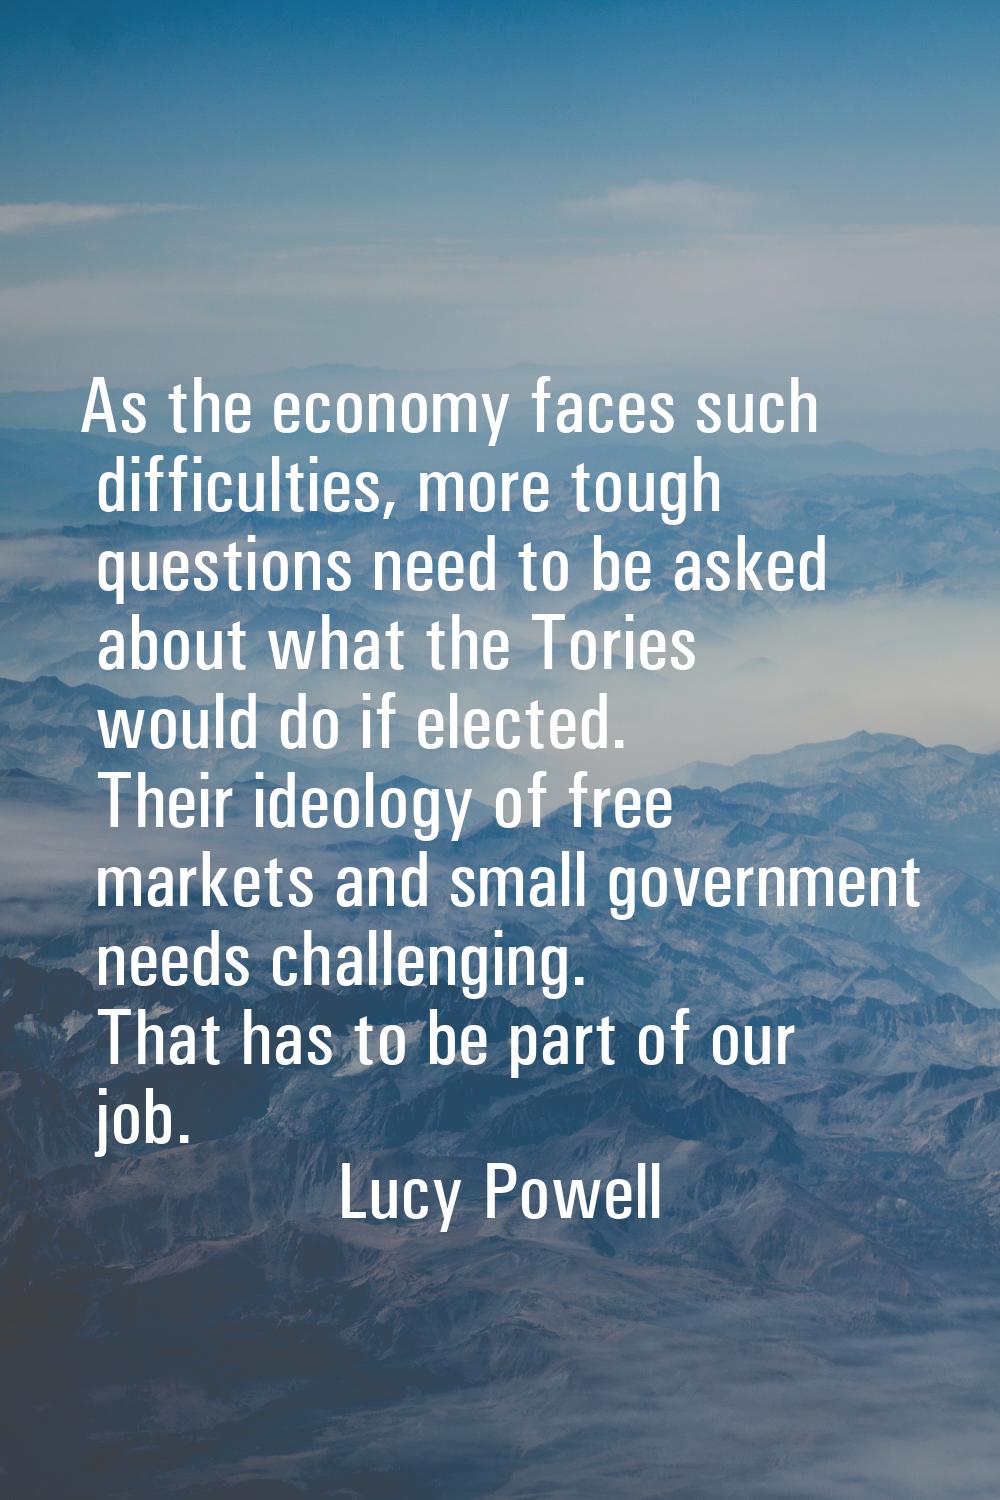 As the economy faces such difficulties, more tough questions need to be asked about what the Tories